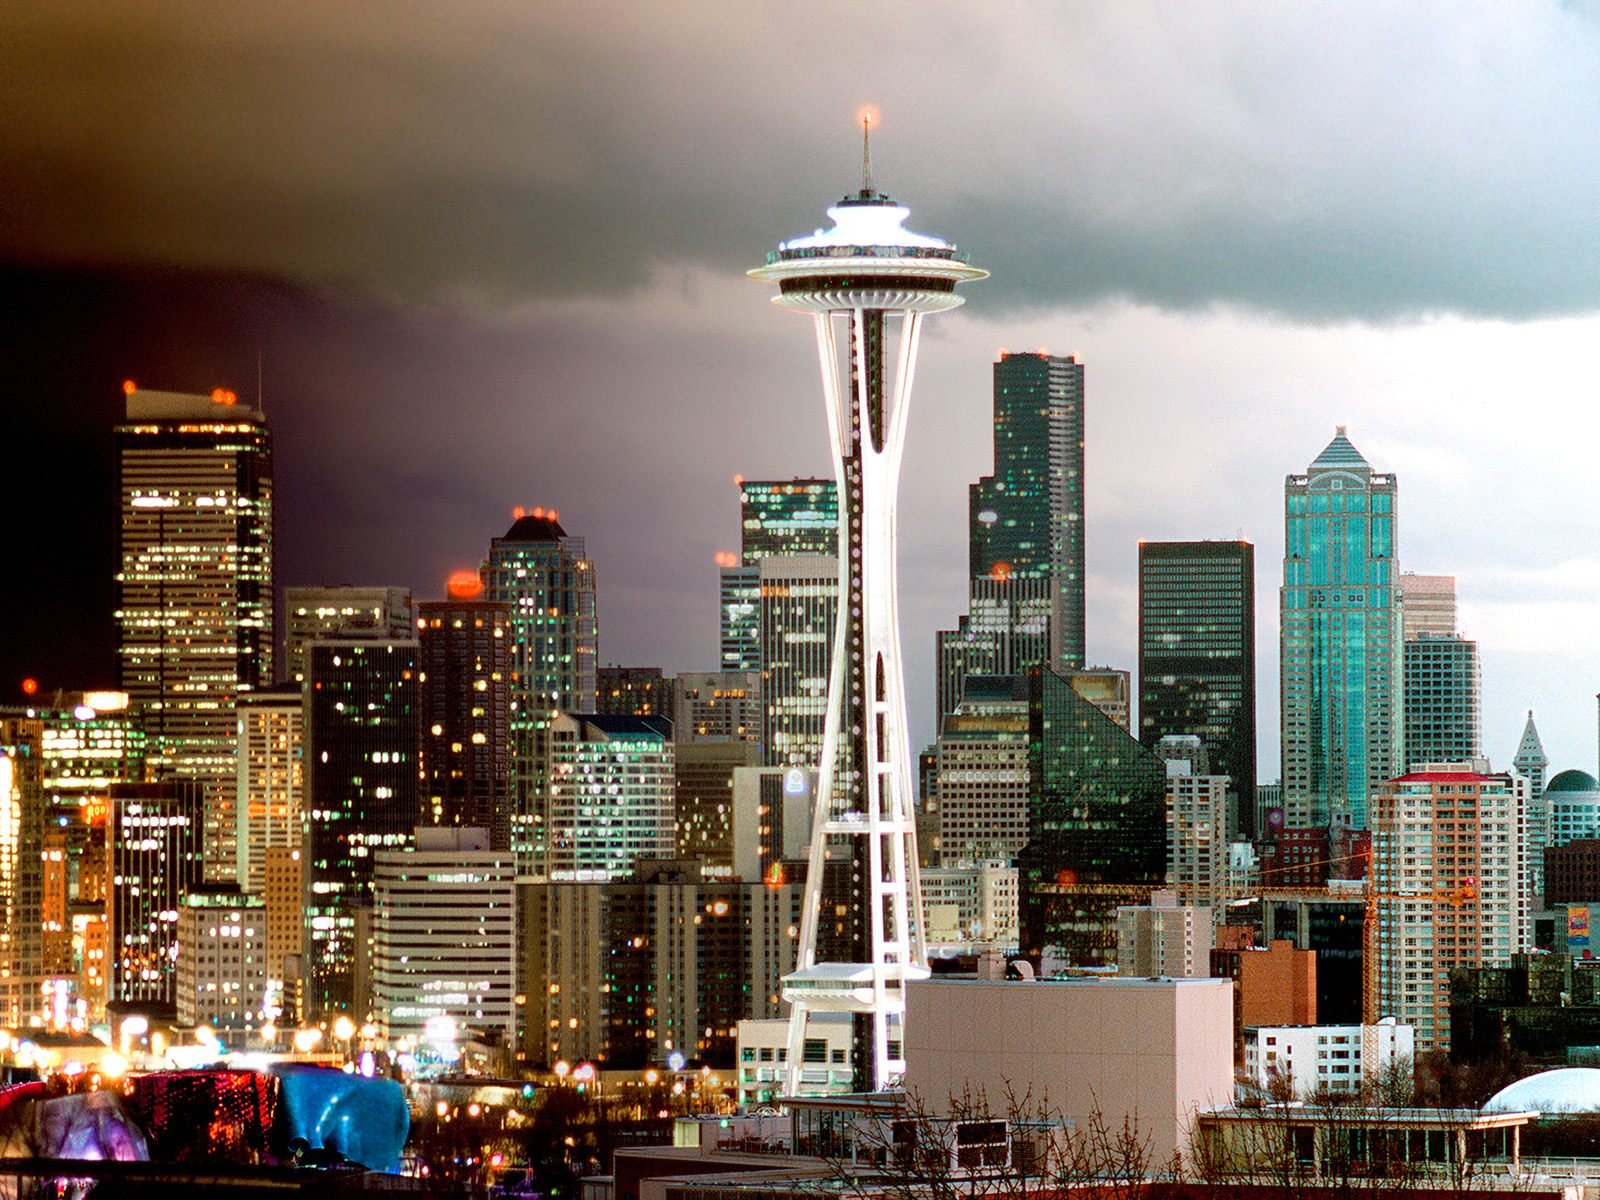 Download Preety Seattle Hd Wallpaper photos images and pics Send by